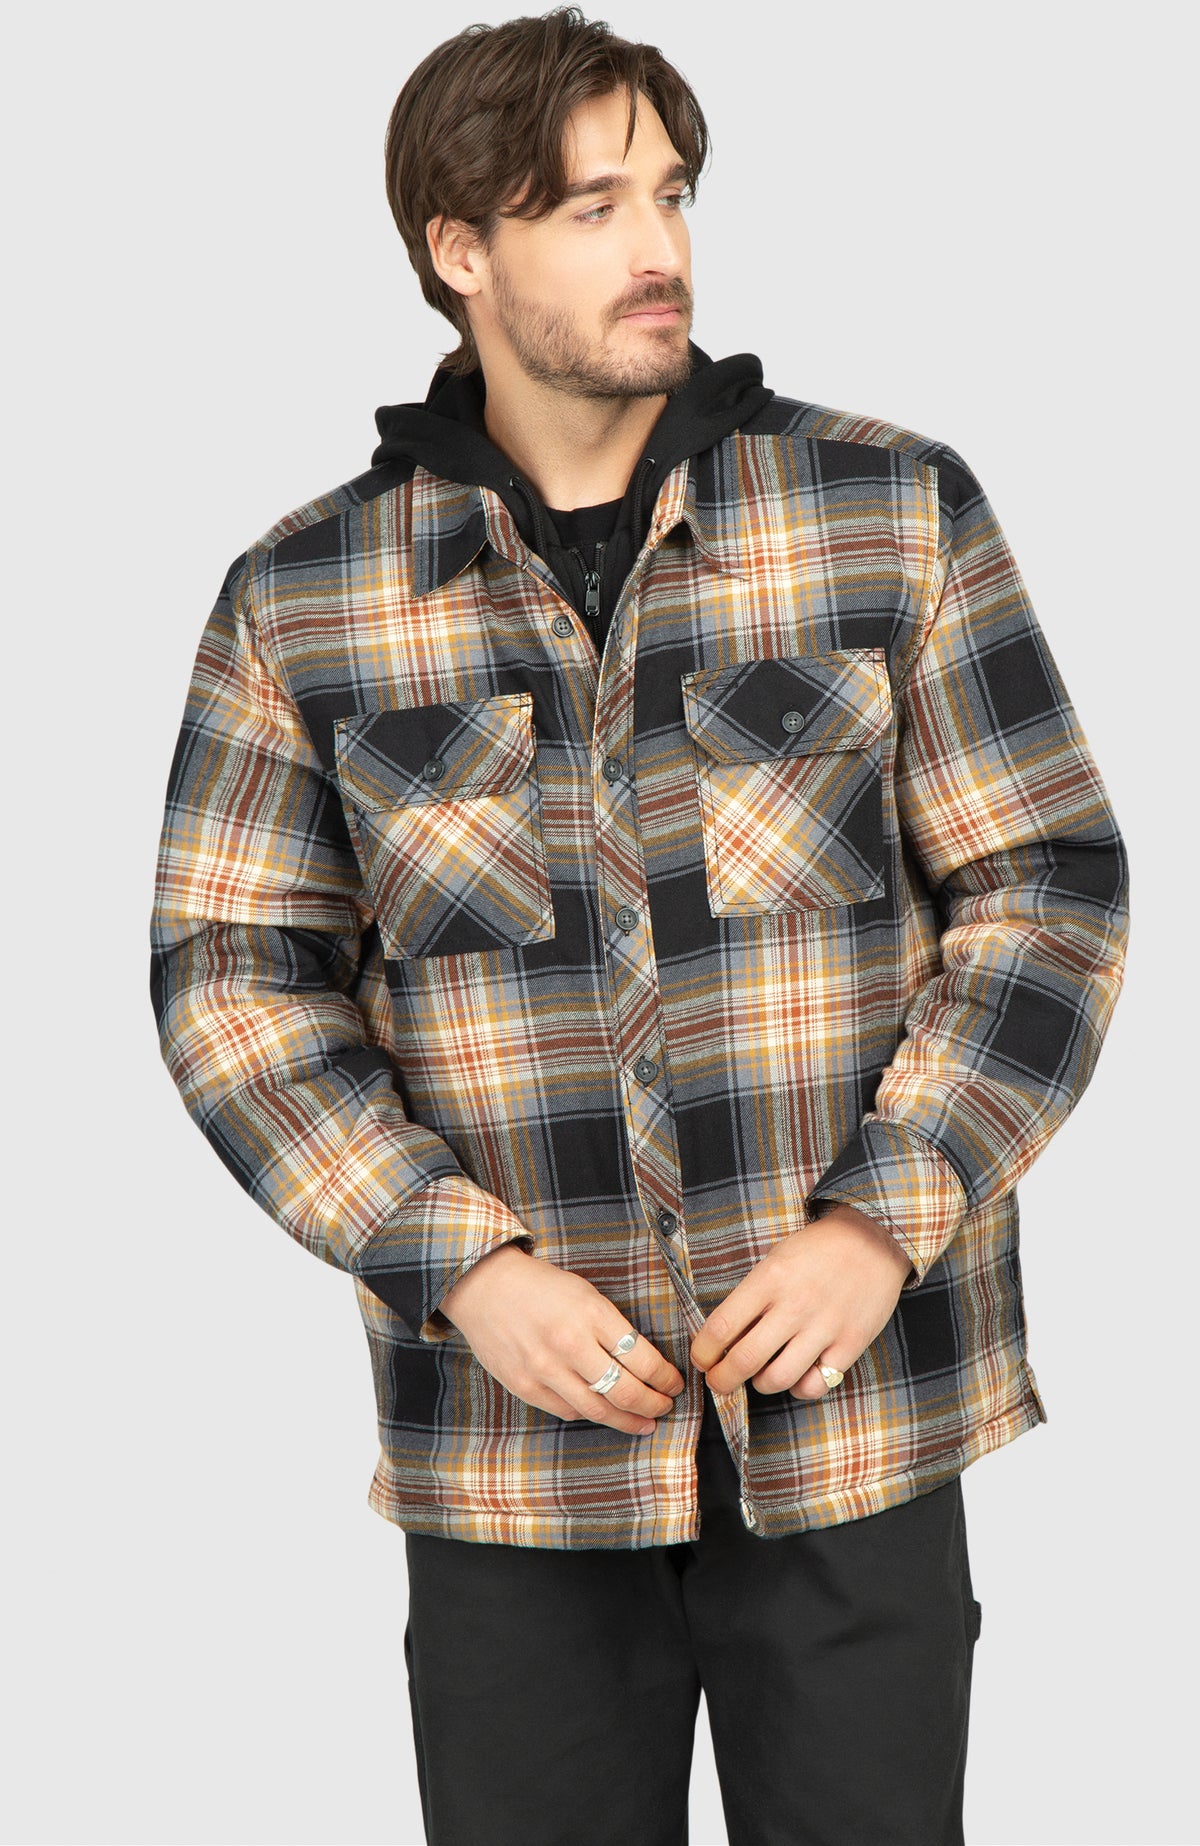 Chestnut Hooded Flannel Shirt Jacket - Front Buttoned Up